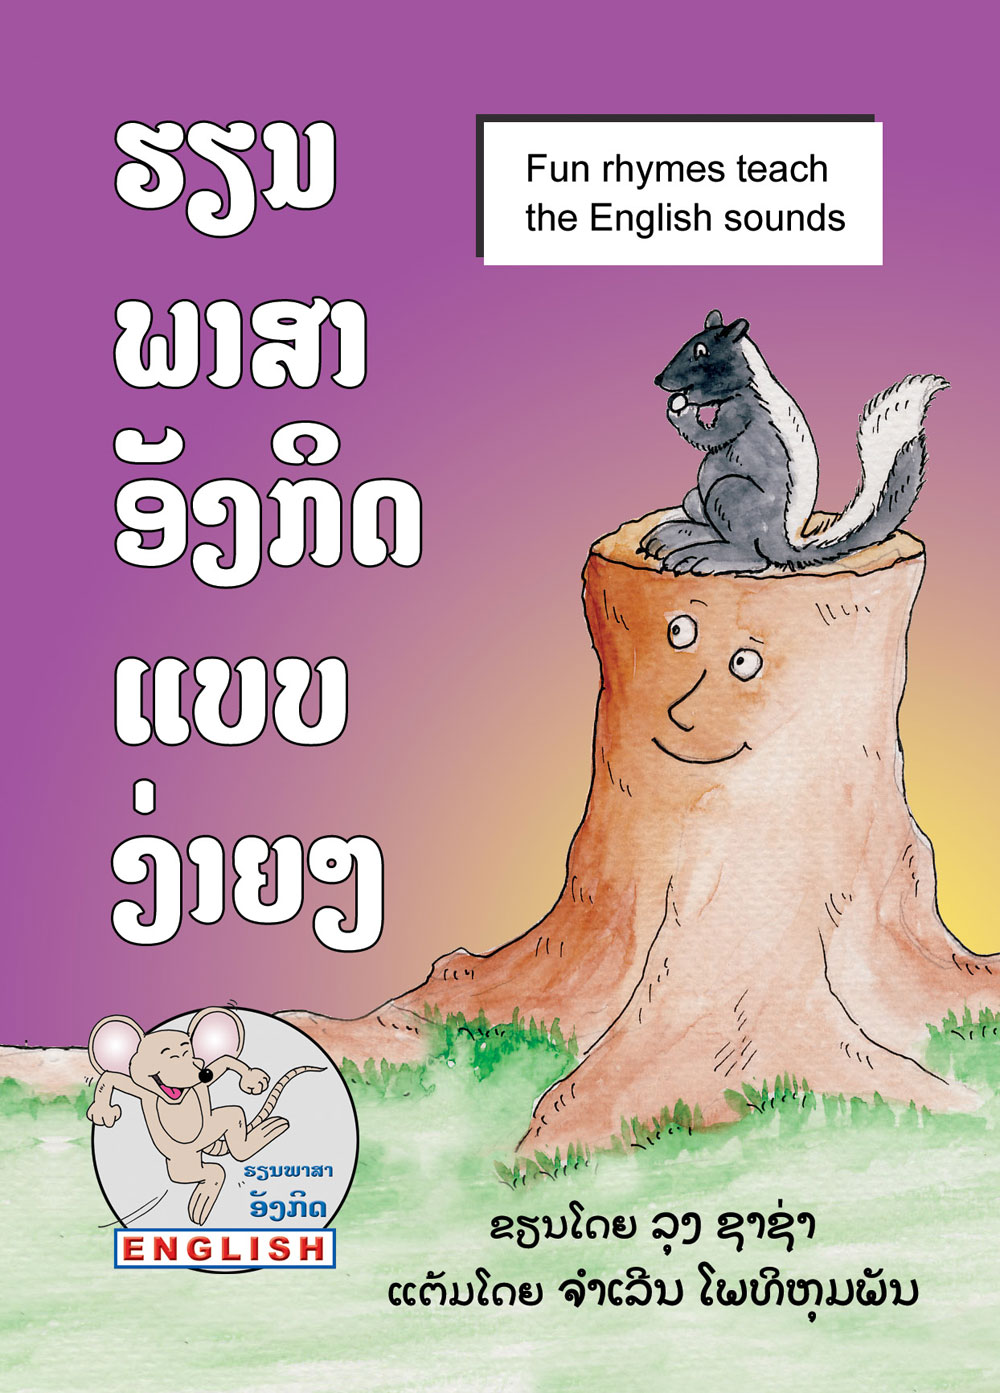 English is Fun! large book cover, published in English for Lao students